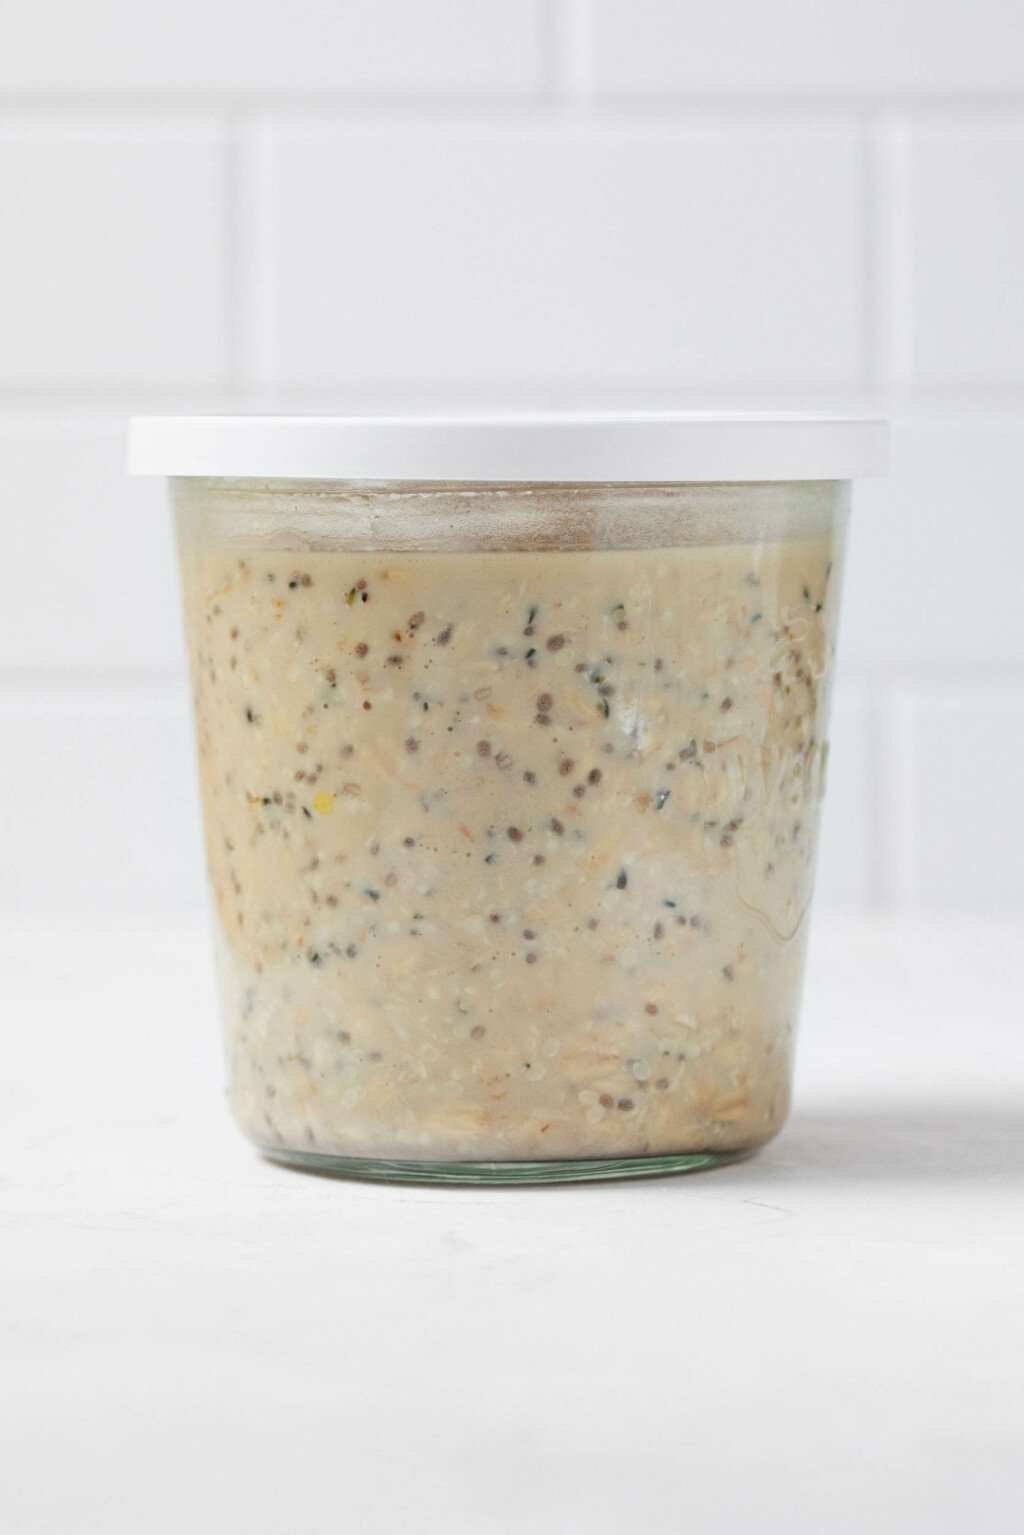 A glass mason jar is filled with vegan overnight oats. There's white brick visible in the background.